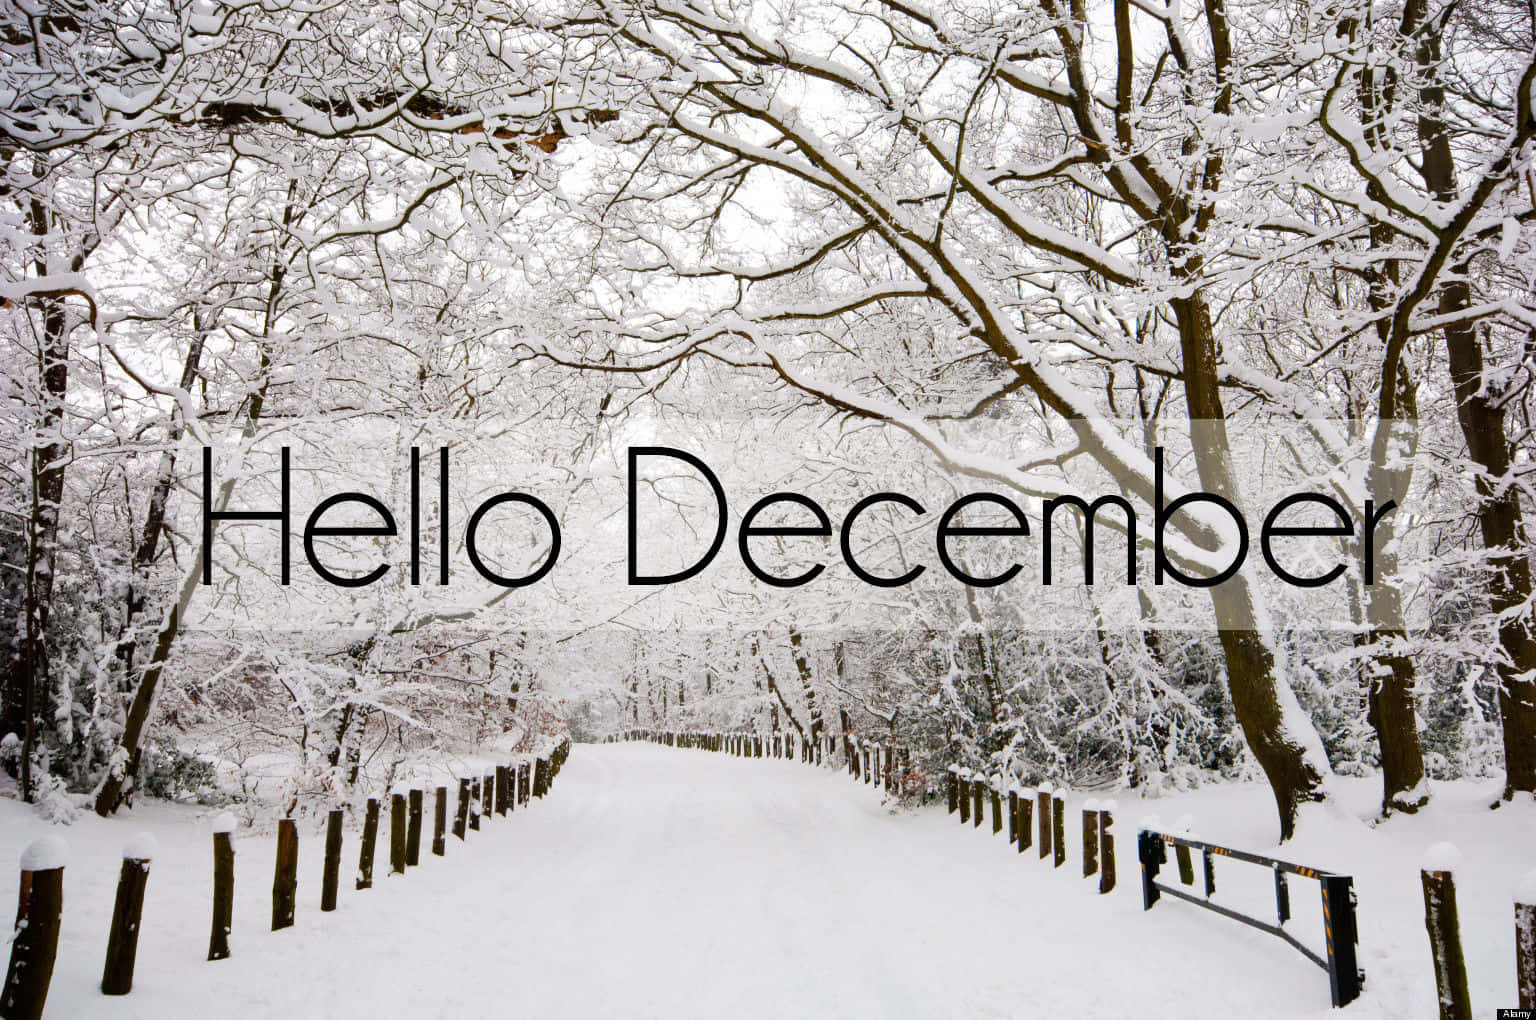 “Welcome December, a time of joy and celebration!” Wallpaper